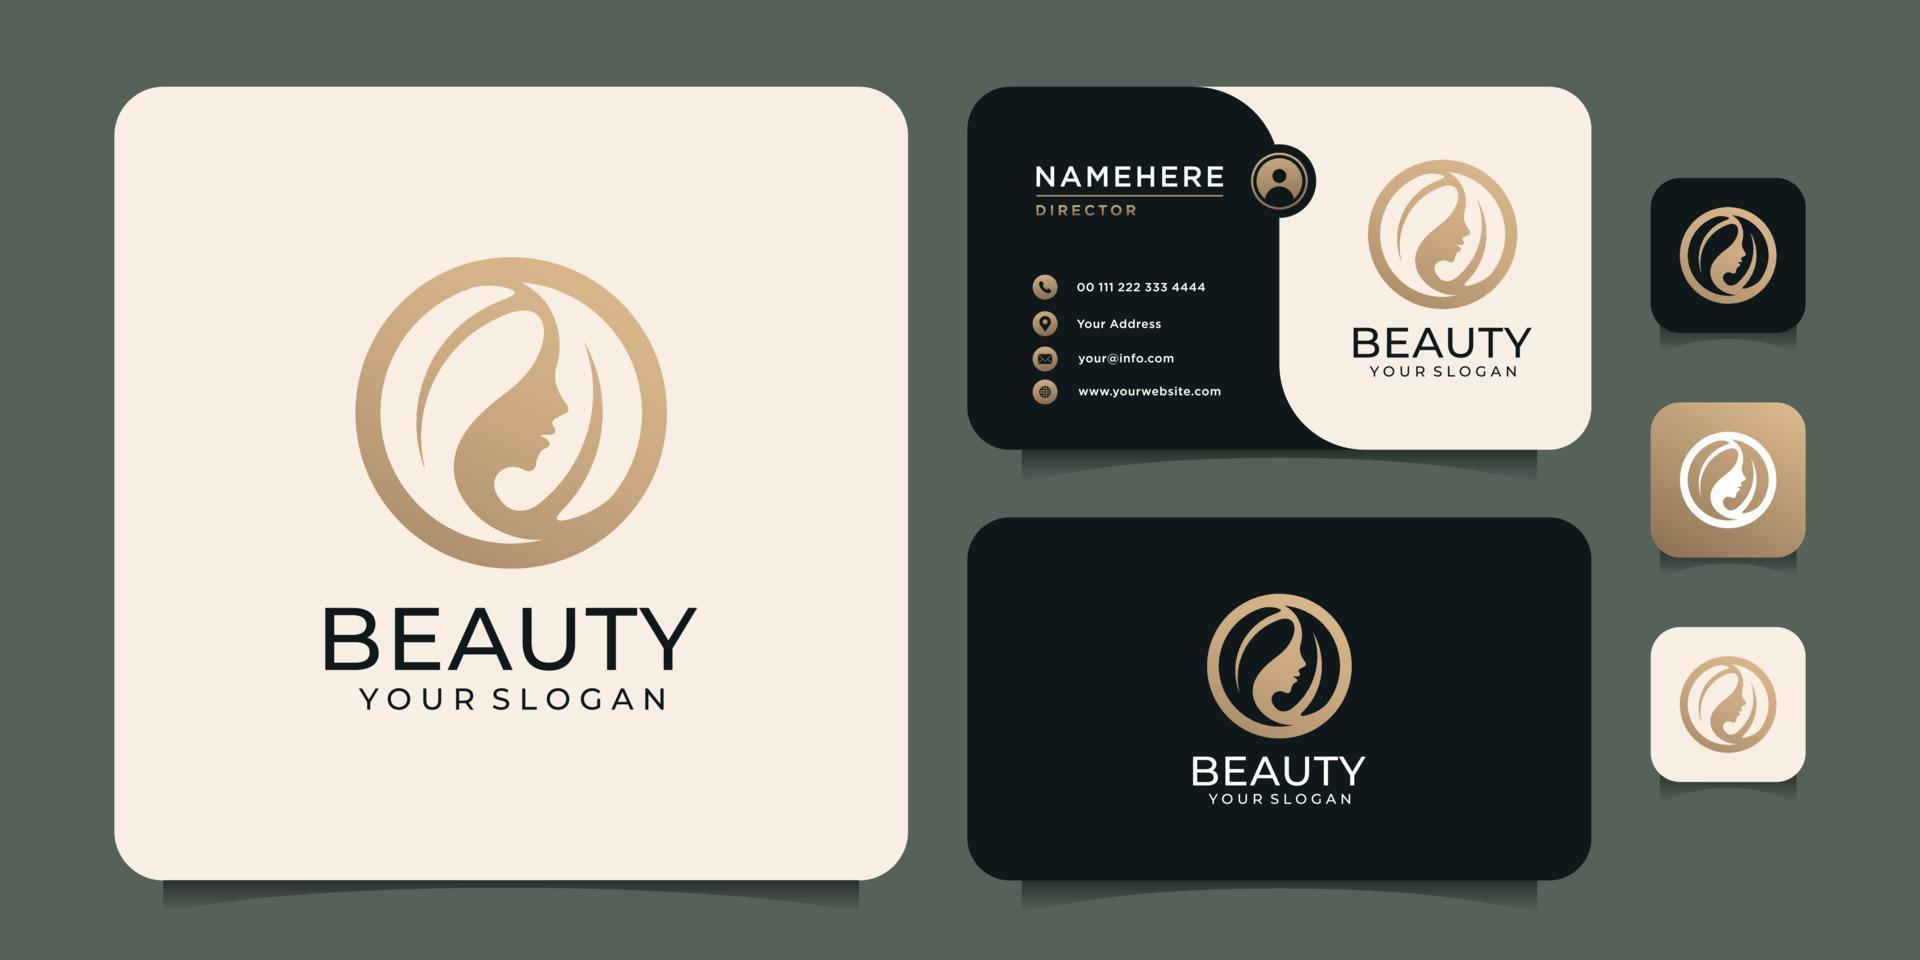 Beauty woman hairstyle  logo design with business card for nature people salon elements vector